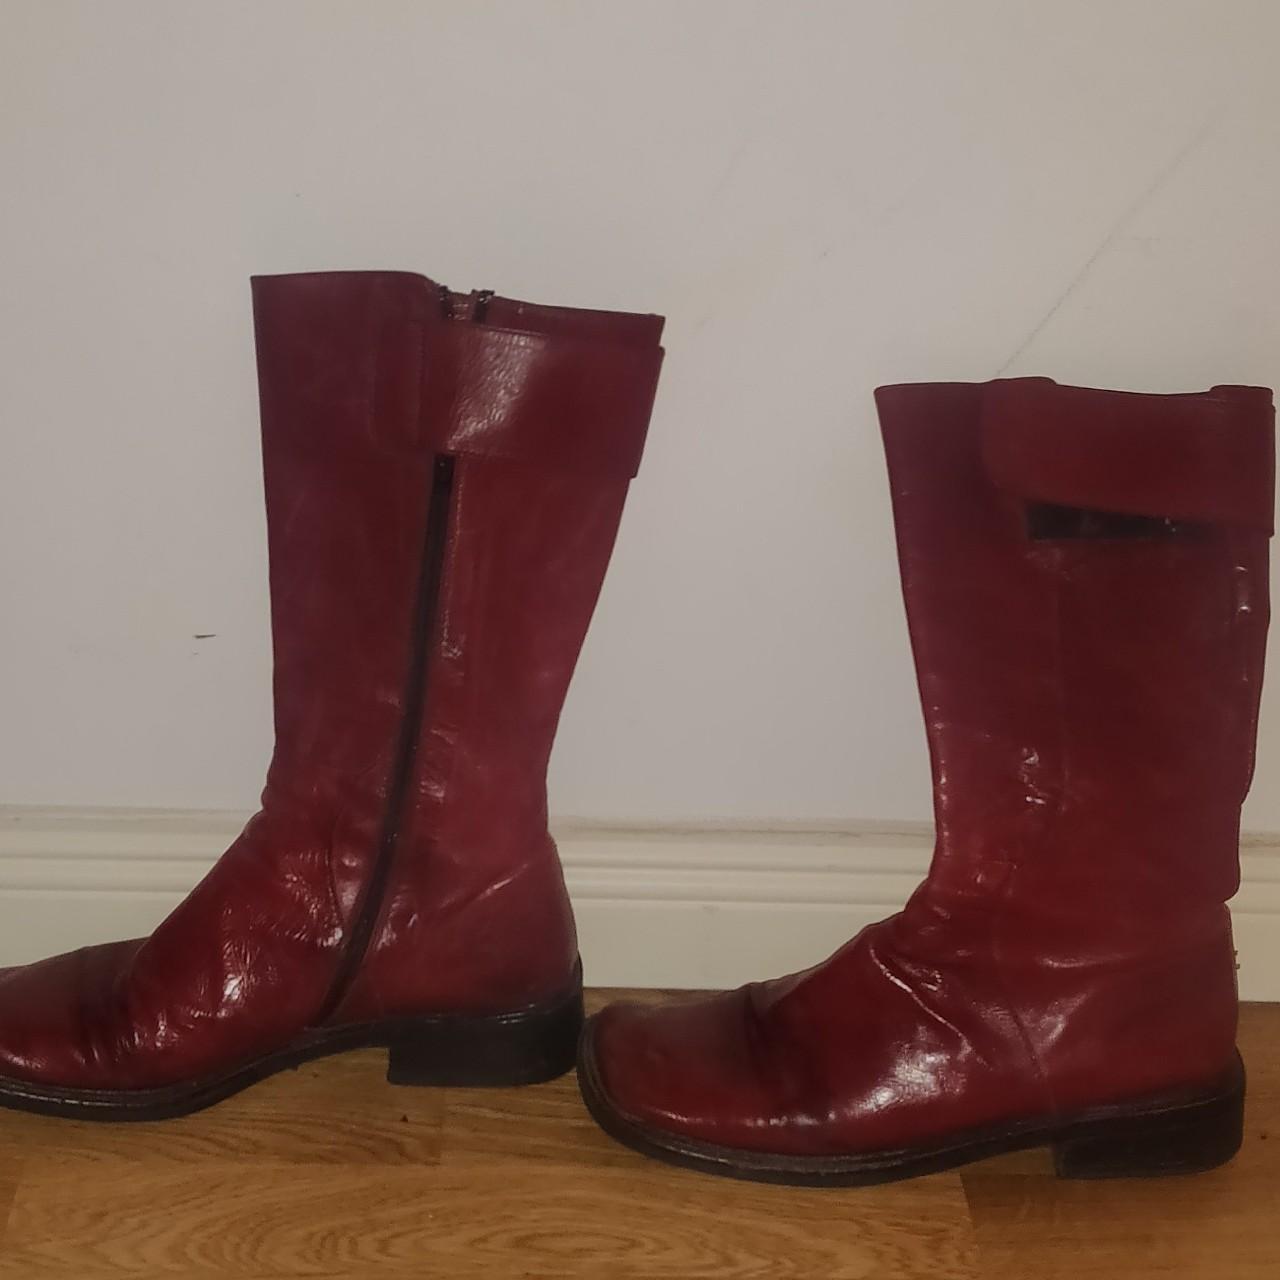 Gorgeous dark red square toe boots in excellent... - Depop